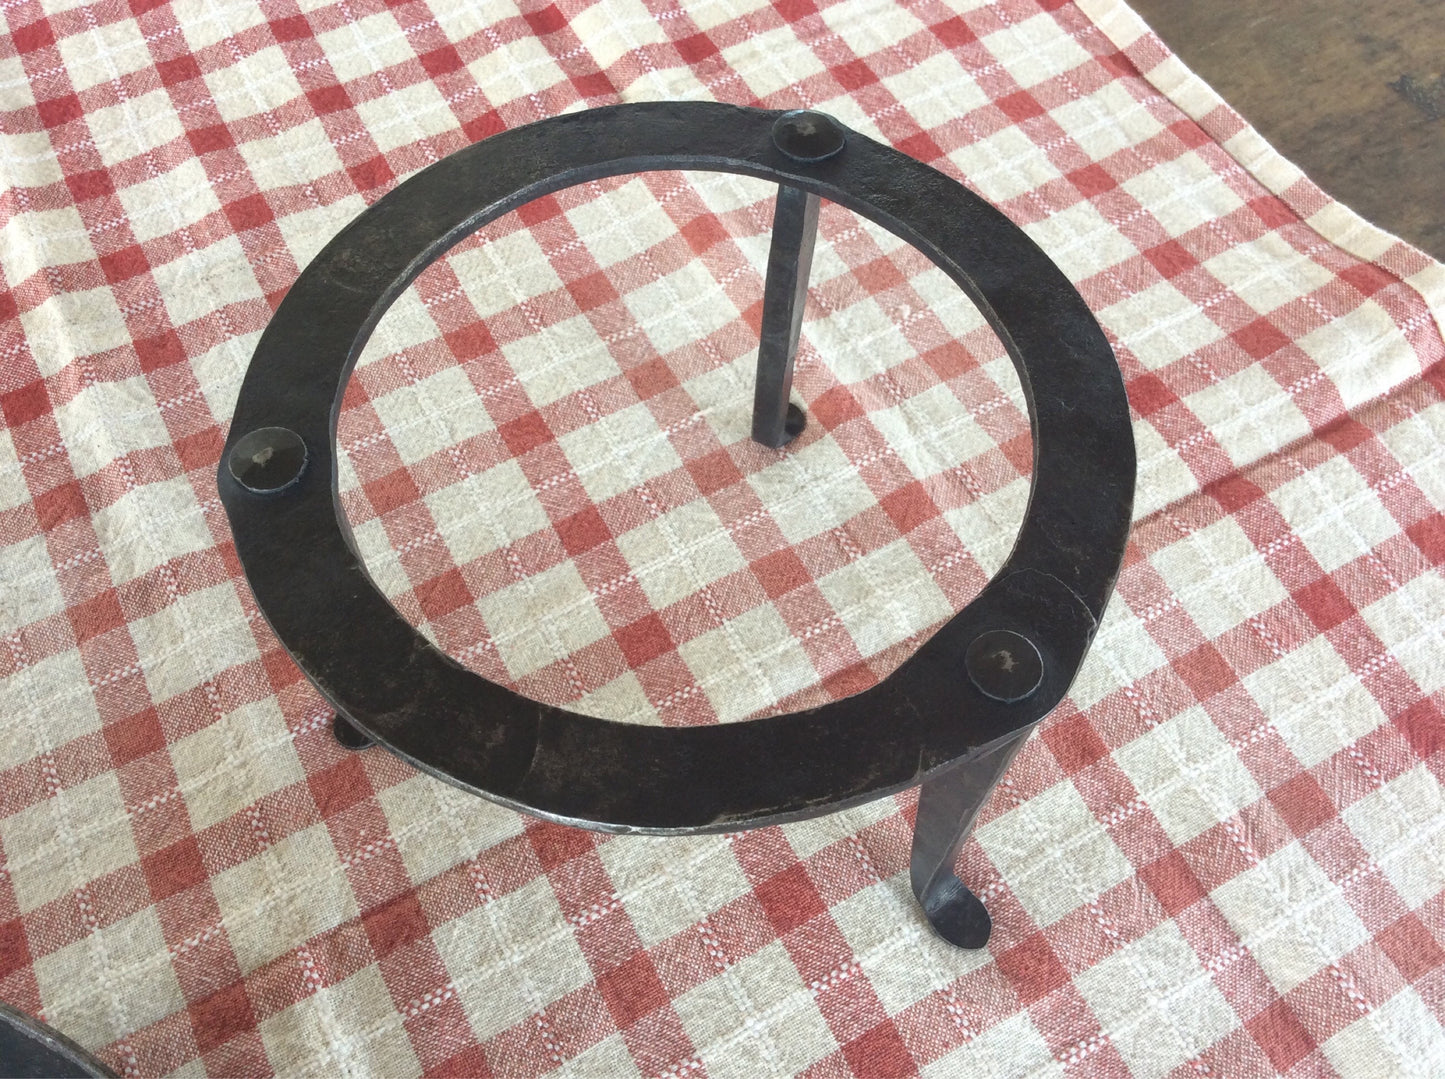 Forged Campfire Cooking Trivet – Old West Iron